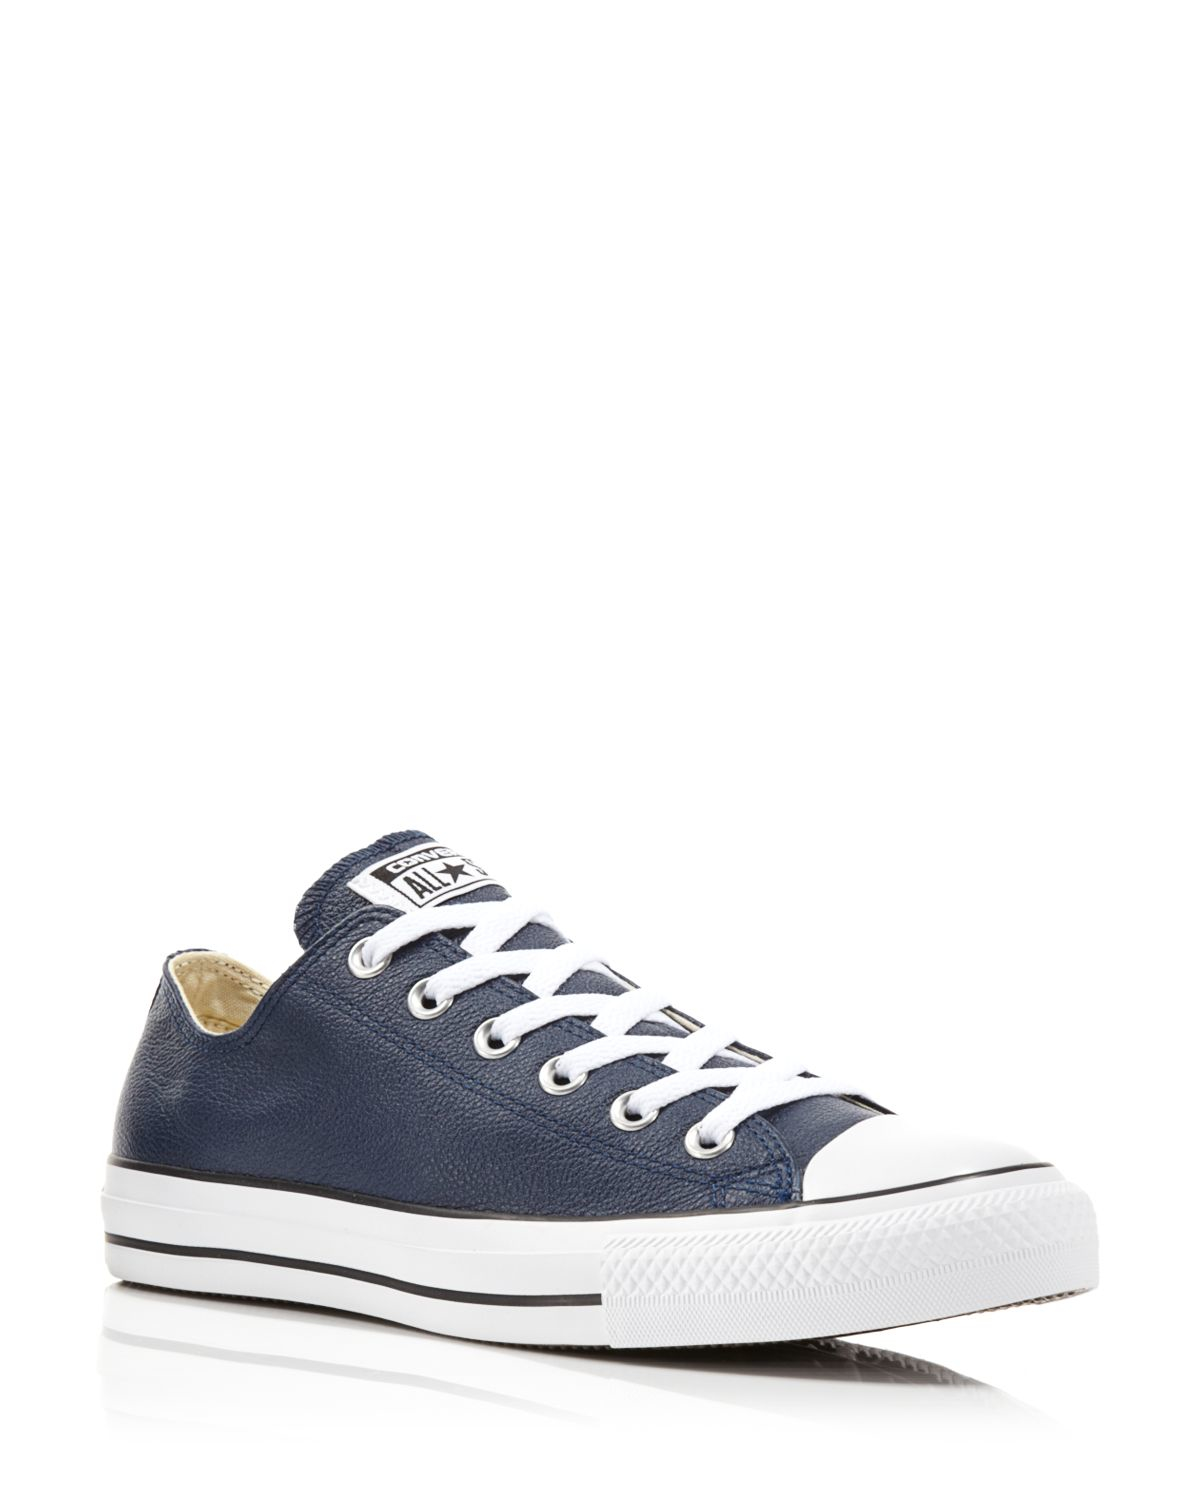 converse leather navy blue